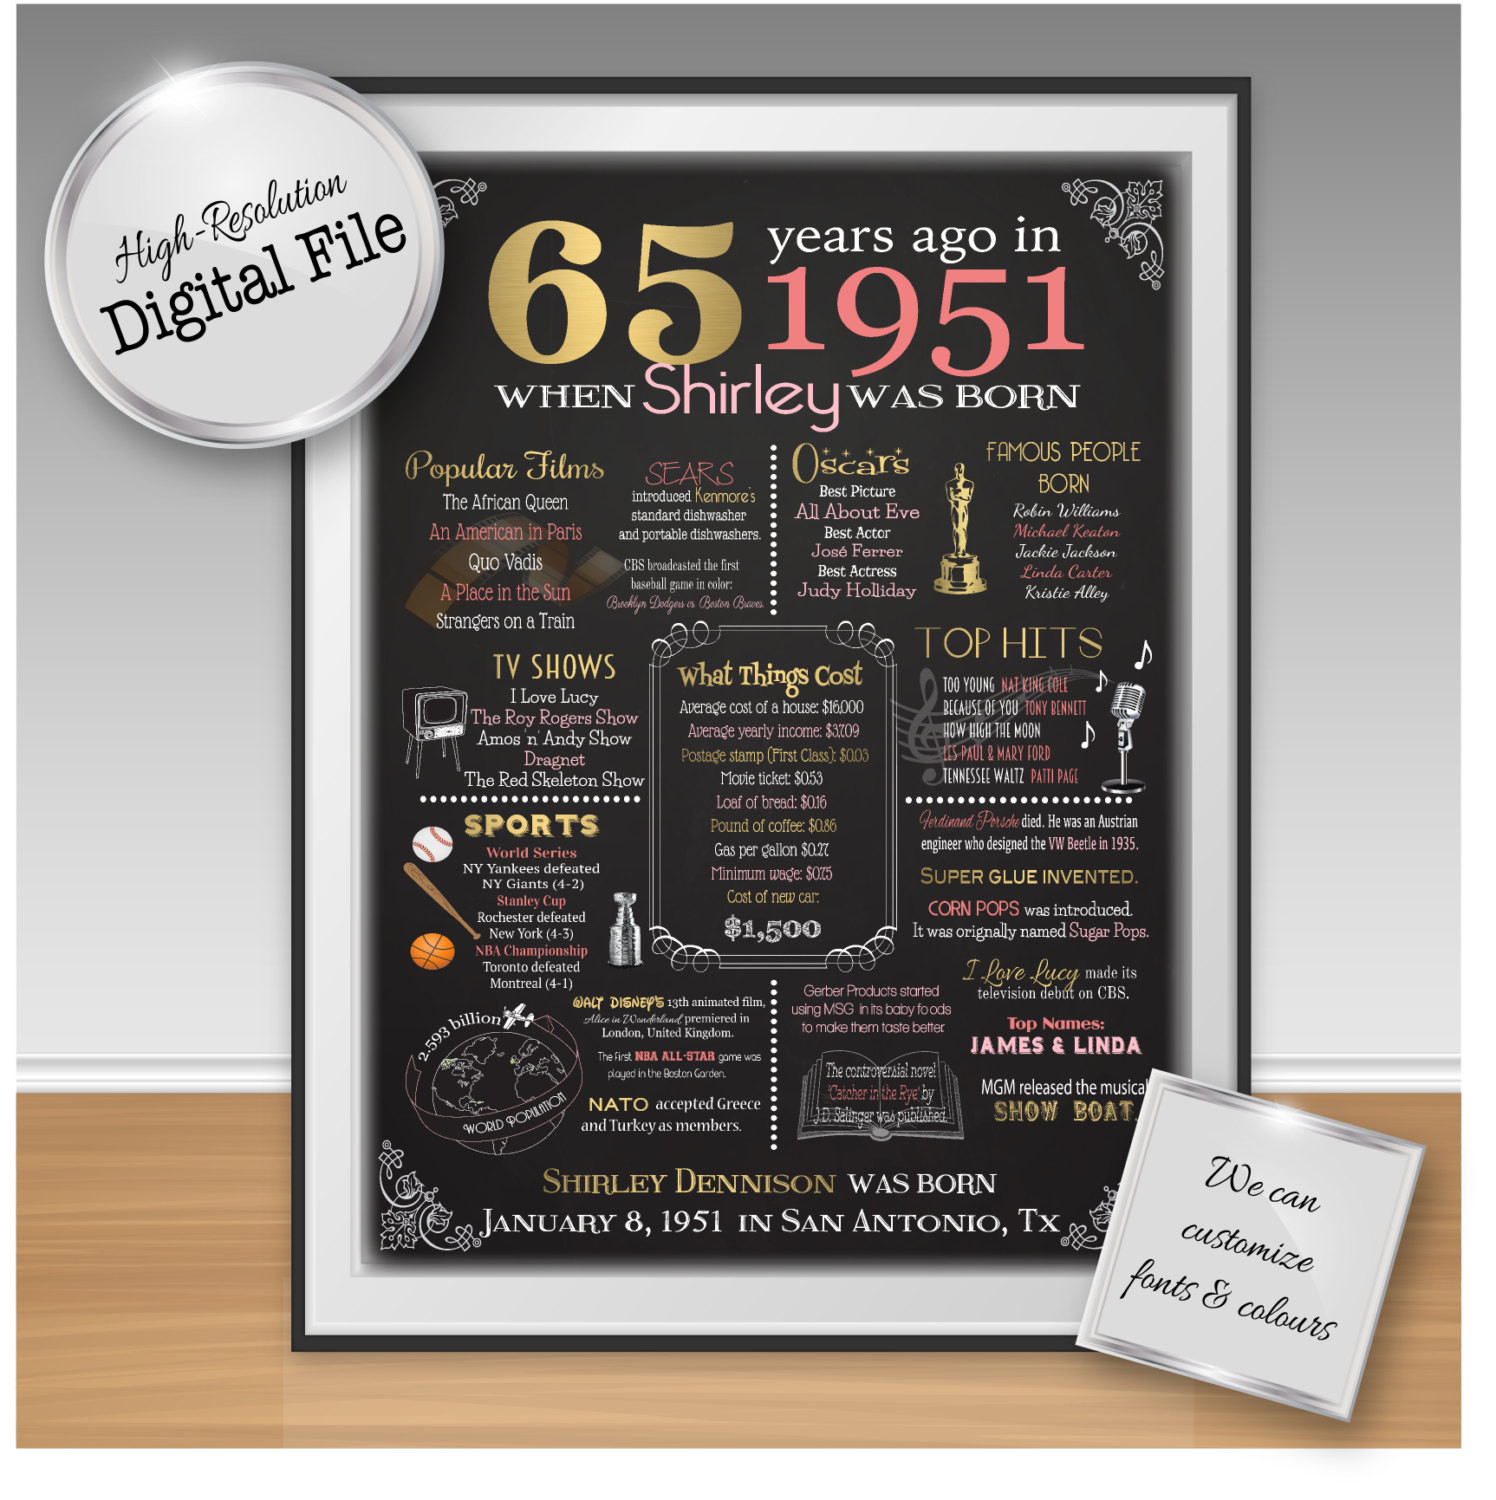 65Th Birthday Gift Ideas For Mom
 24 the Best Ideas for Gifts for 65th Birthday